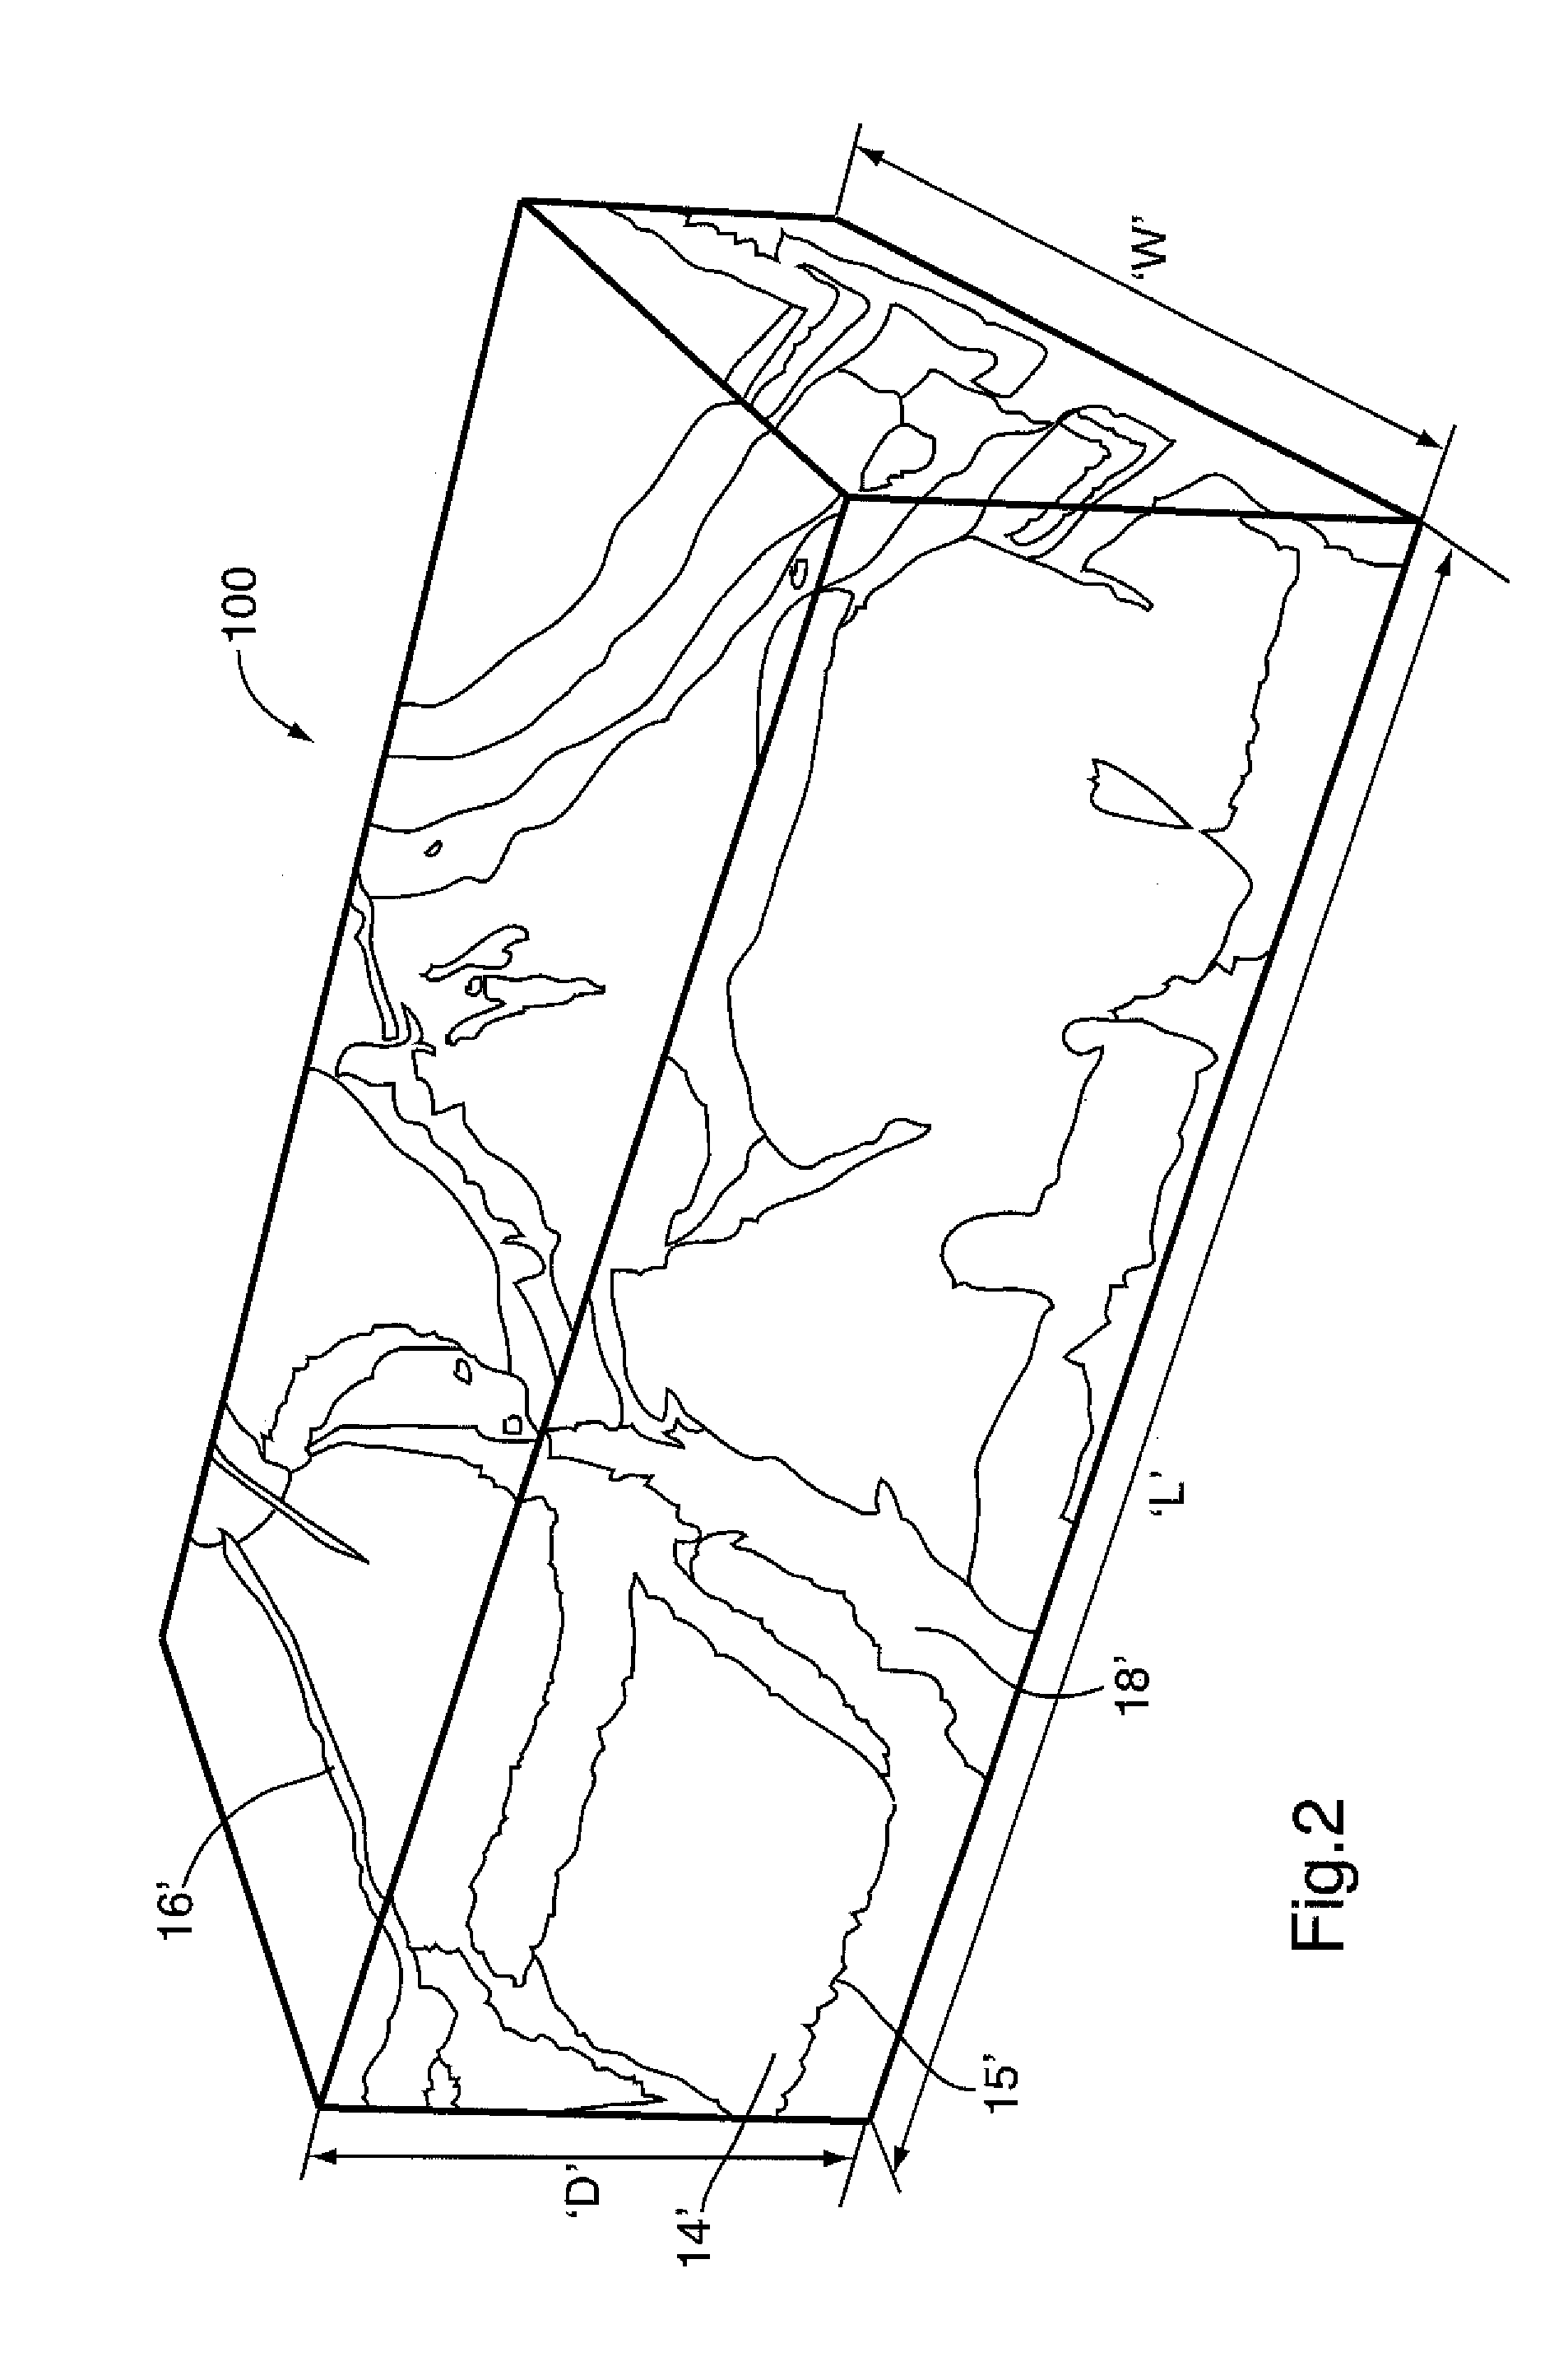 Method for creating a 3D model of a hydrocarbon reservoir, and method for comparative testing of hydrocarbon recovery techniques